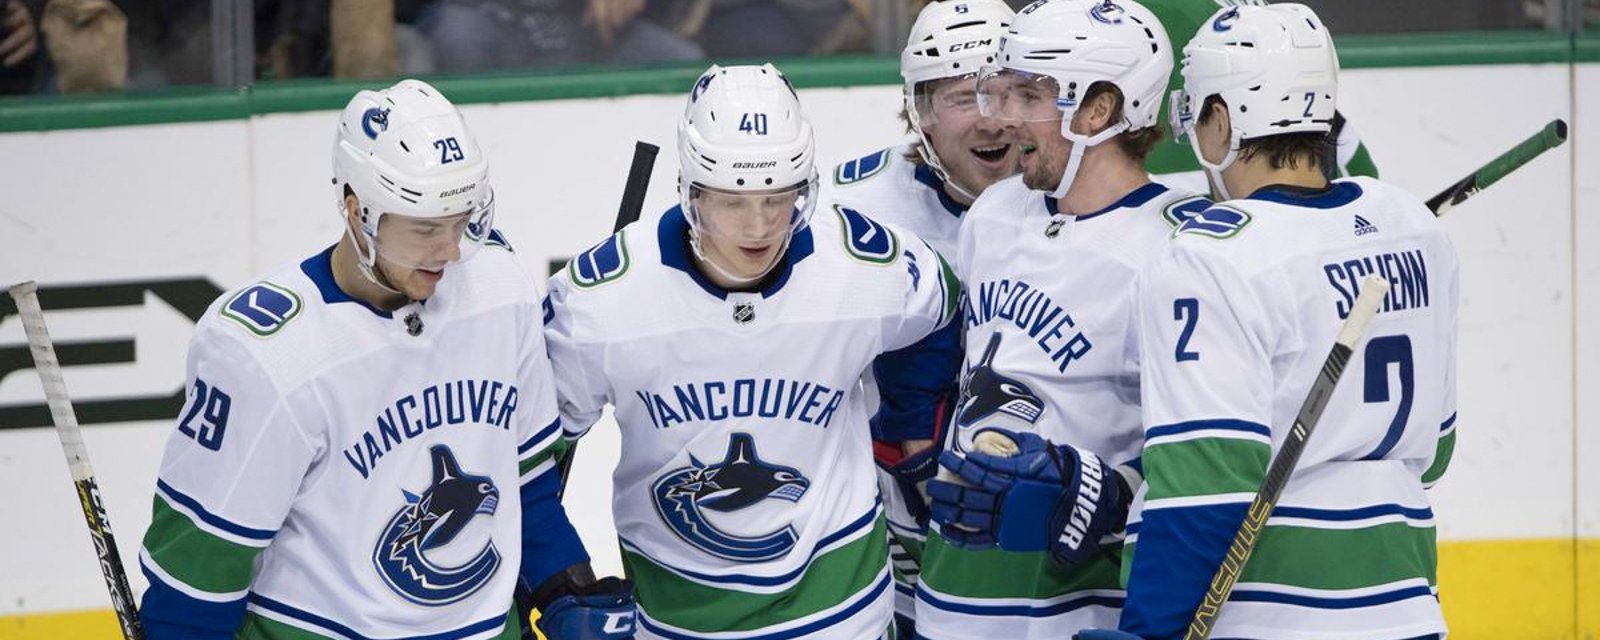 Canucks player asks for “change of scenery”, multiple trade scenarios playing out in Vancouver